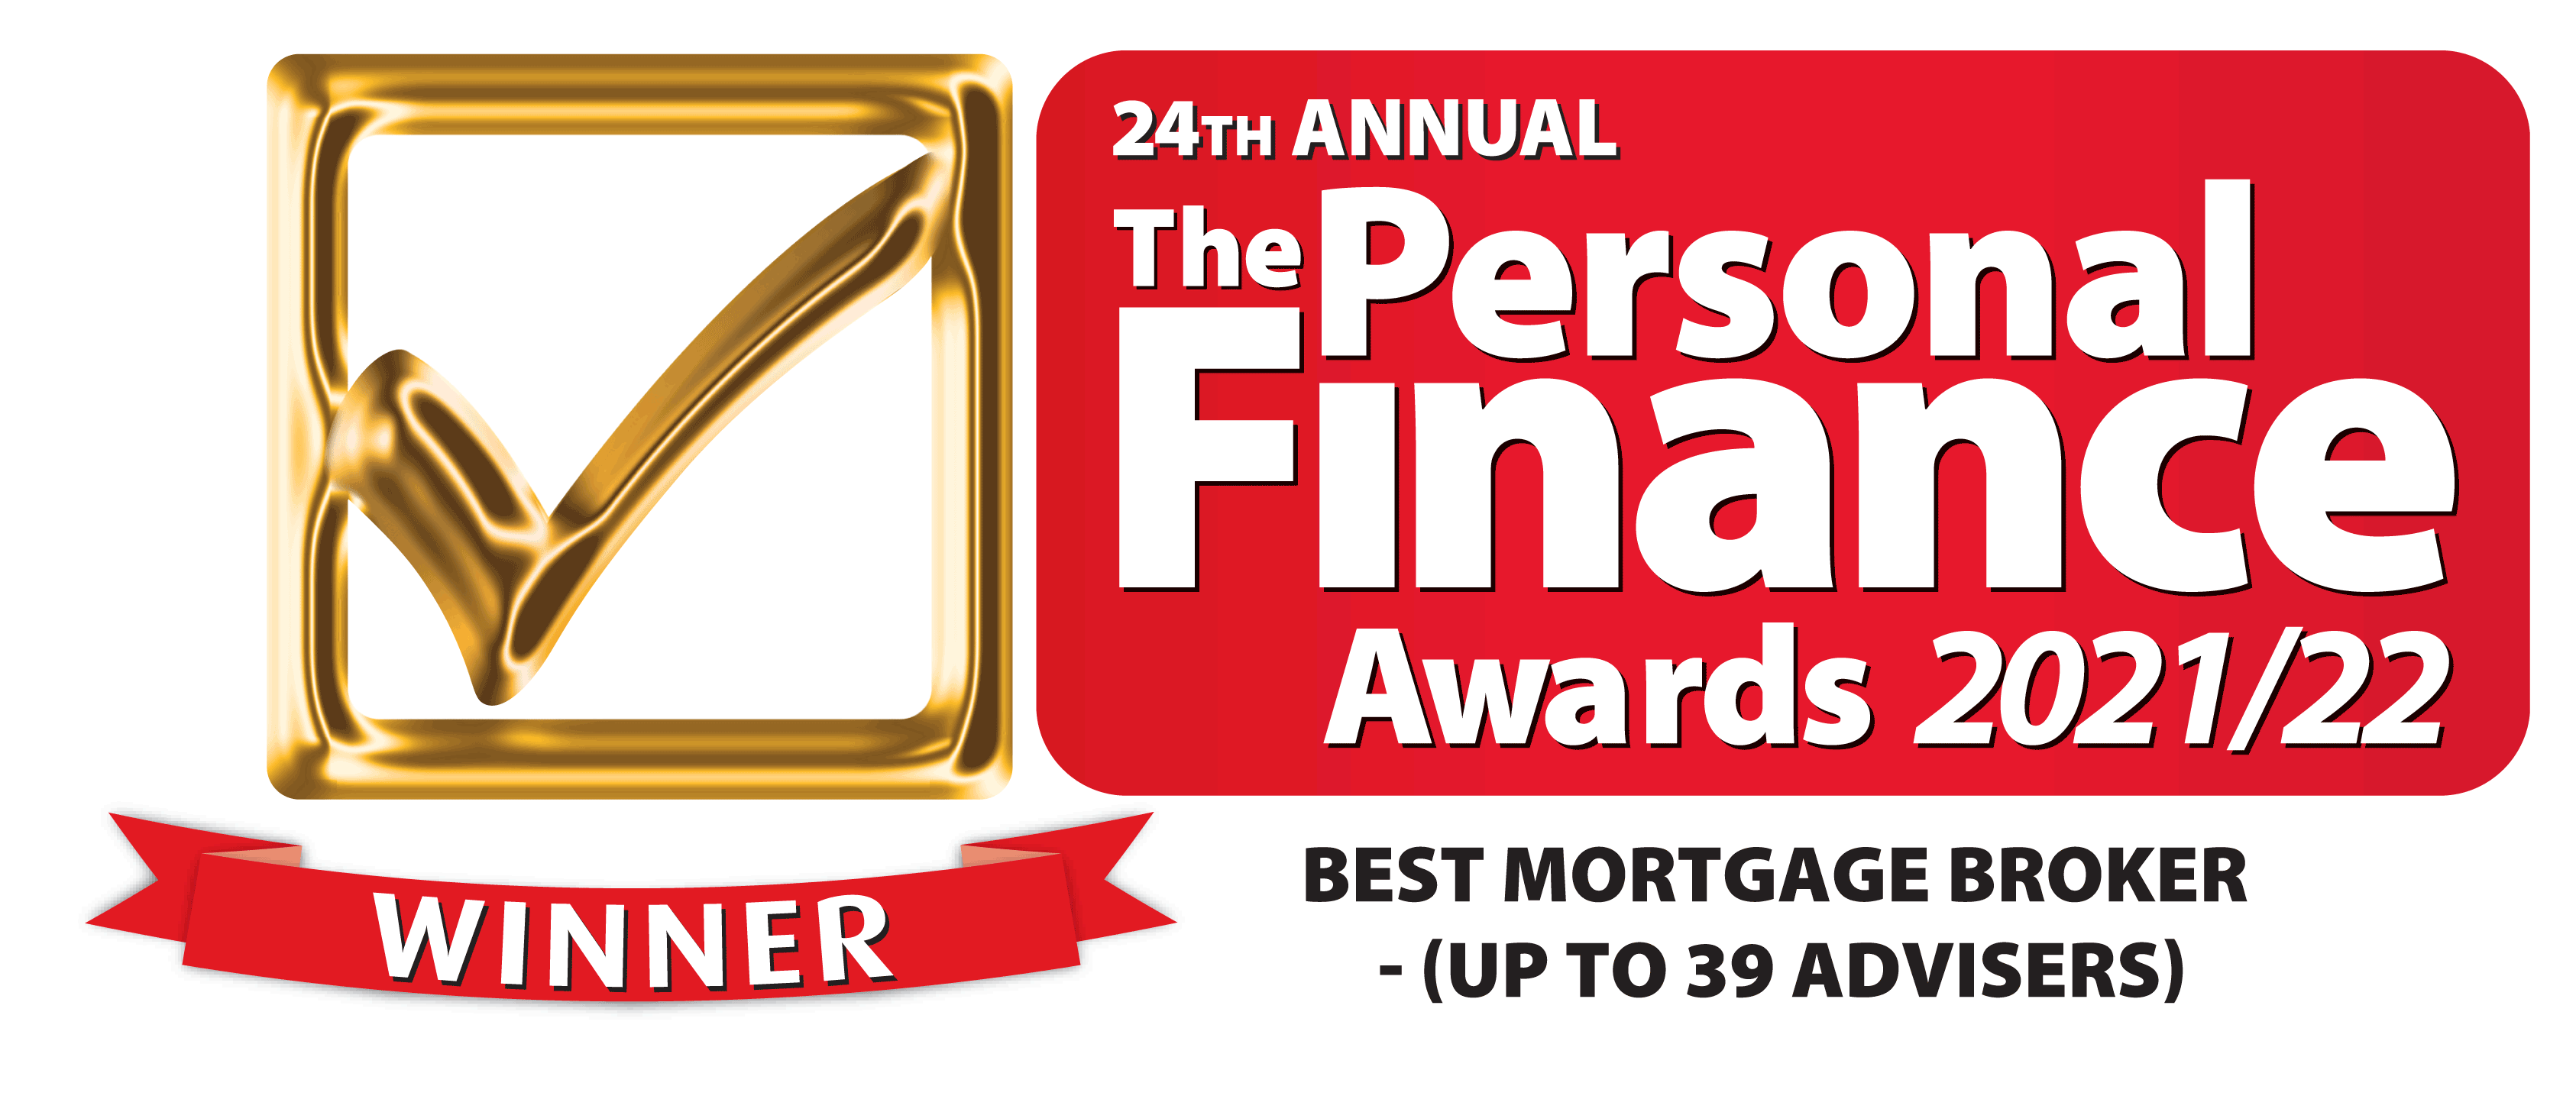 The Personal Finance Awards 2021/2022